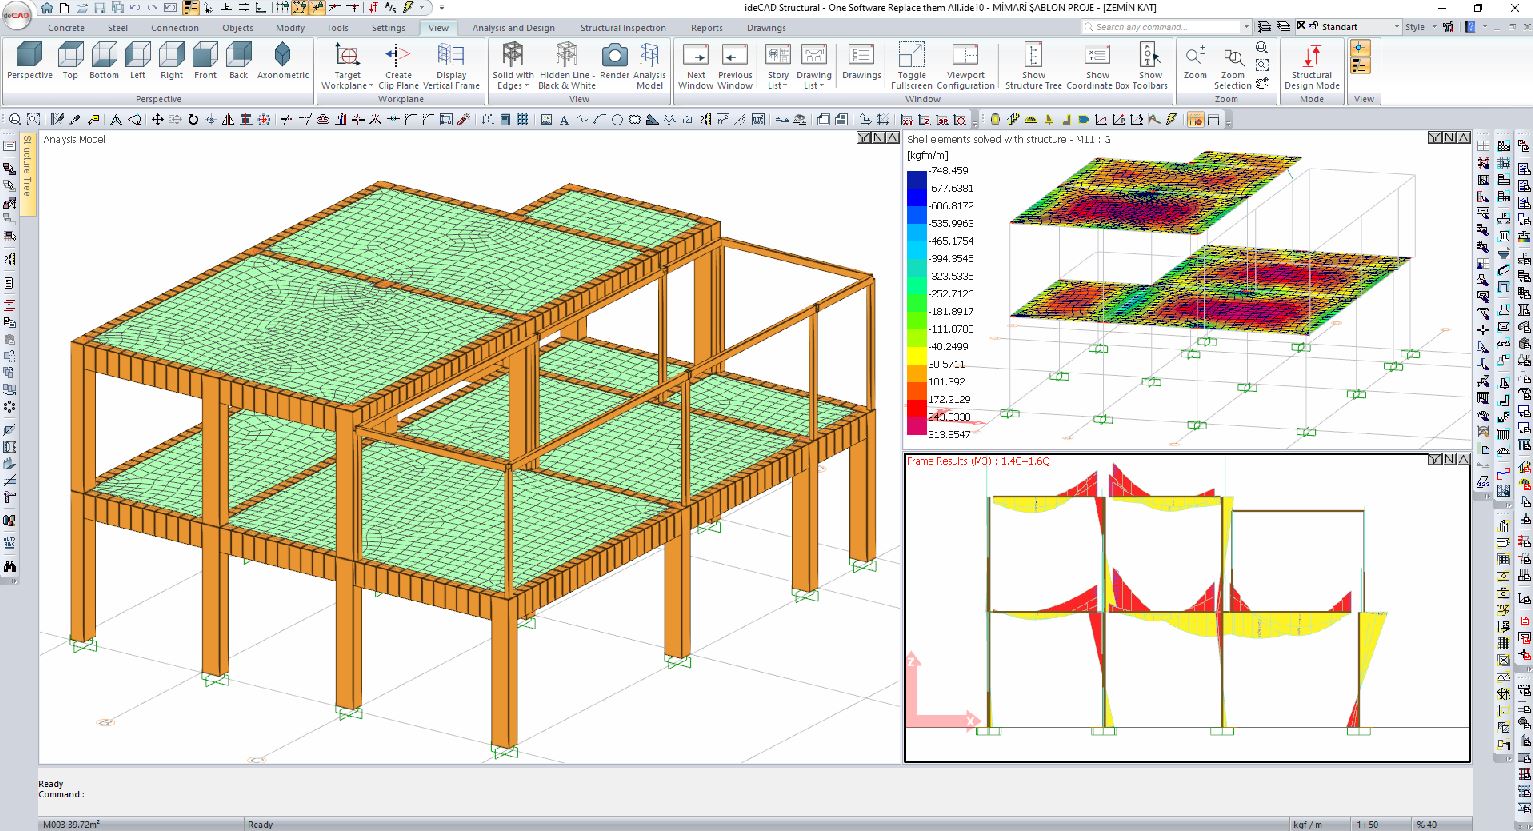 All In One Structural Engineering Software For Structural Analysis Design And Detailing Idecad 